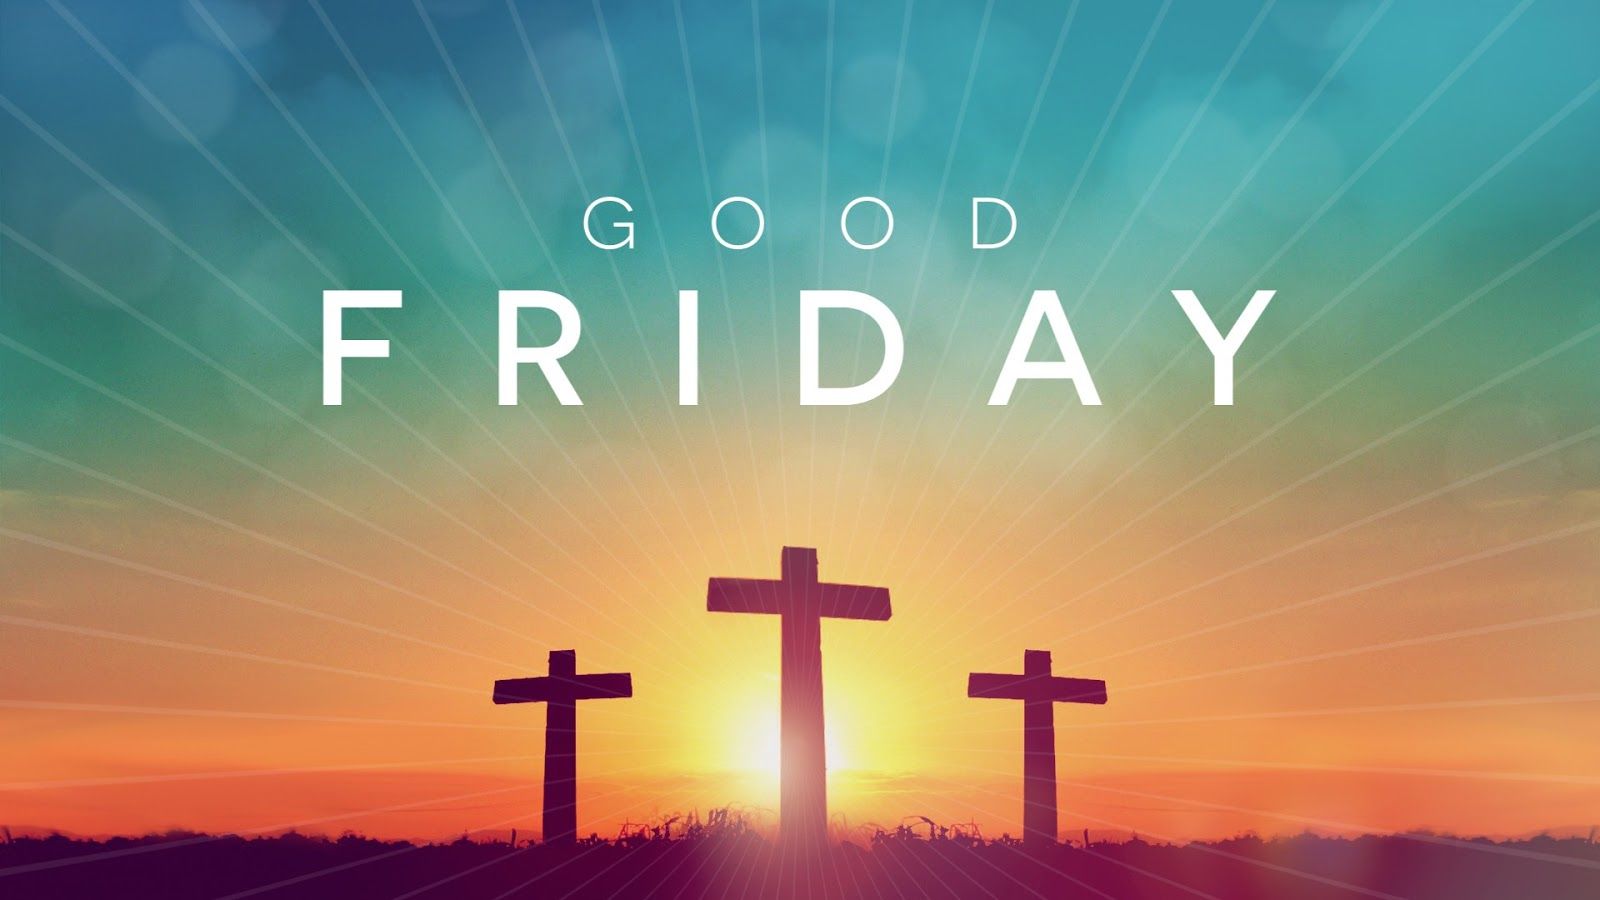 Good Friday History 2020. Download 2020 Wishes Image